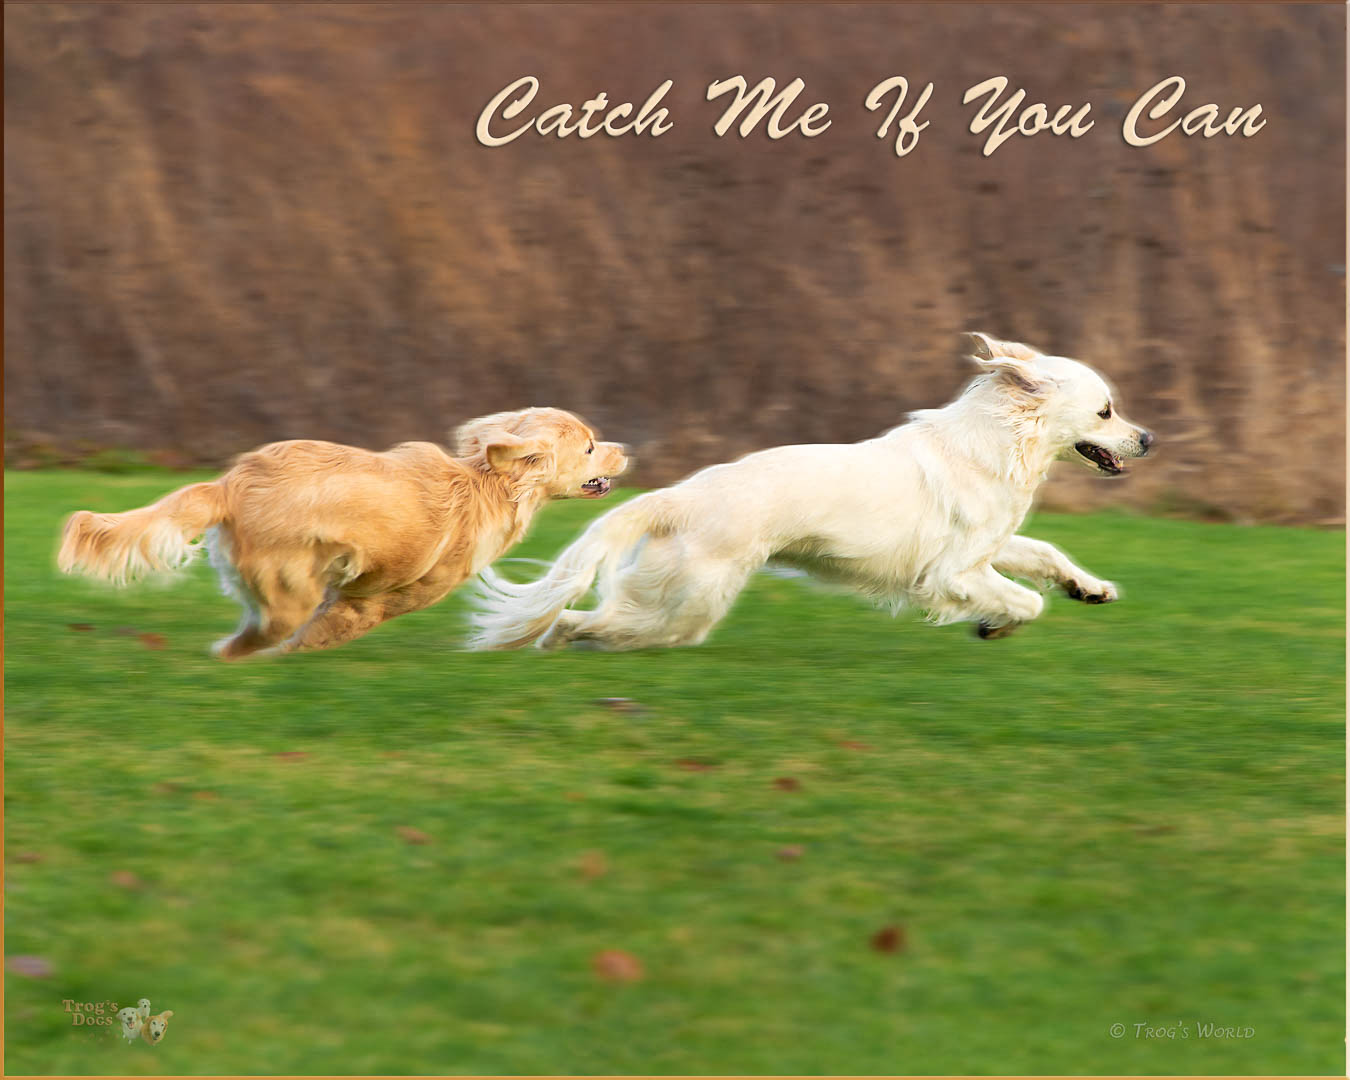 Two Golden Retrievers chasing each other